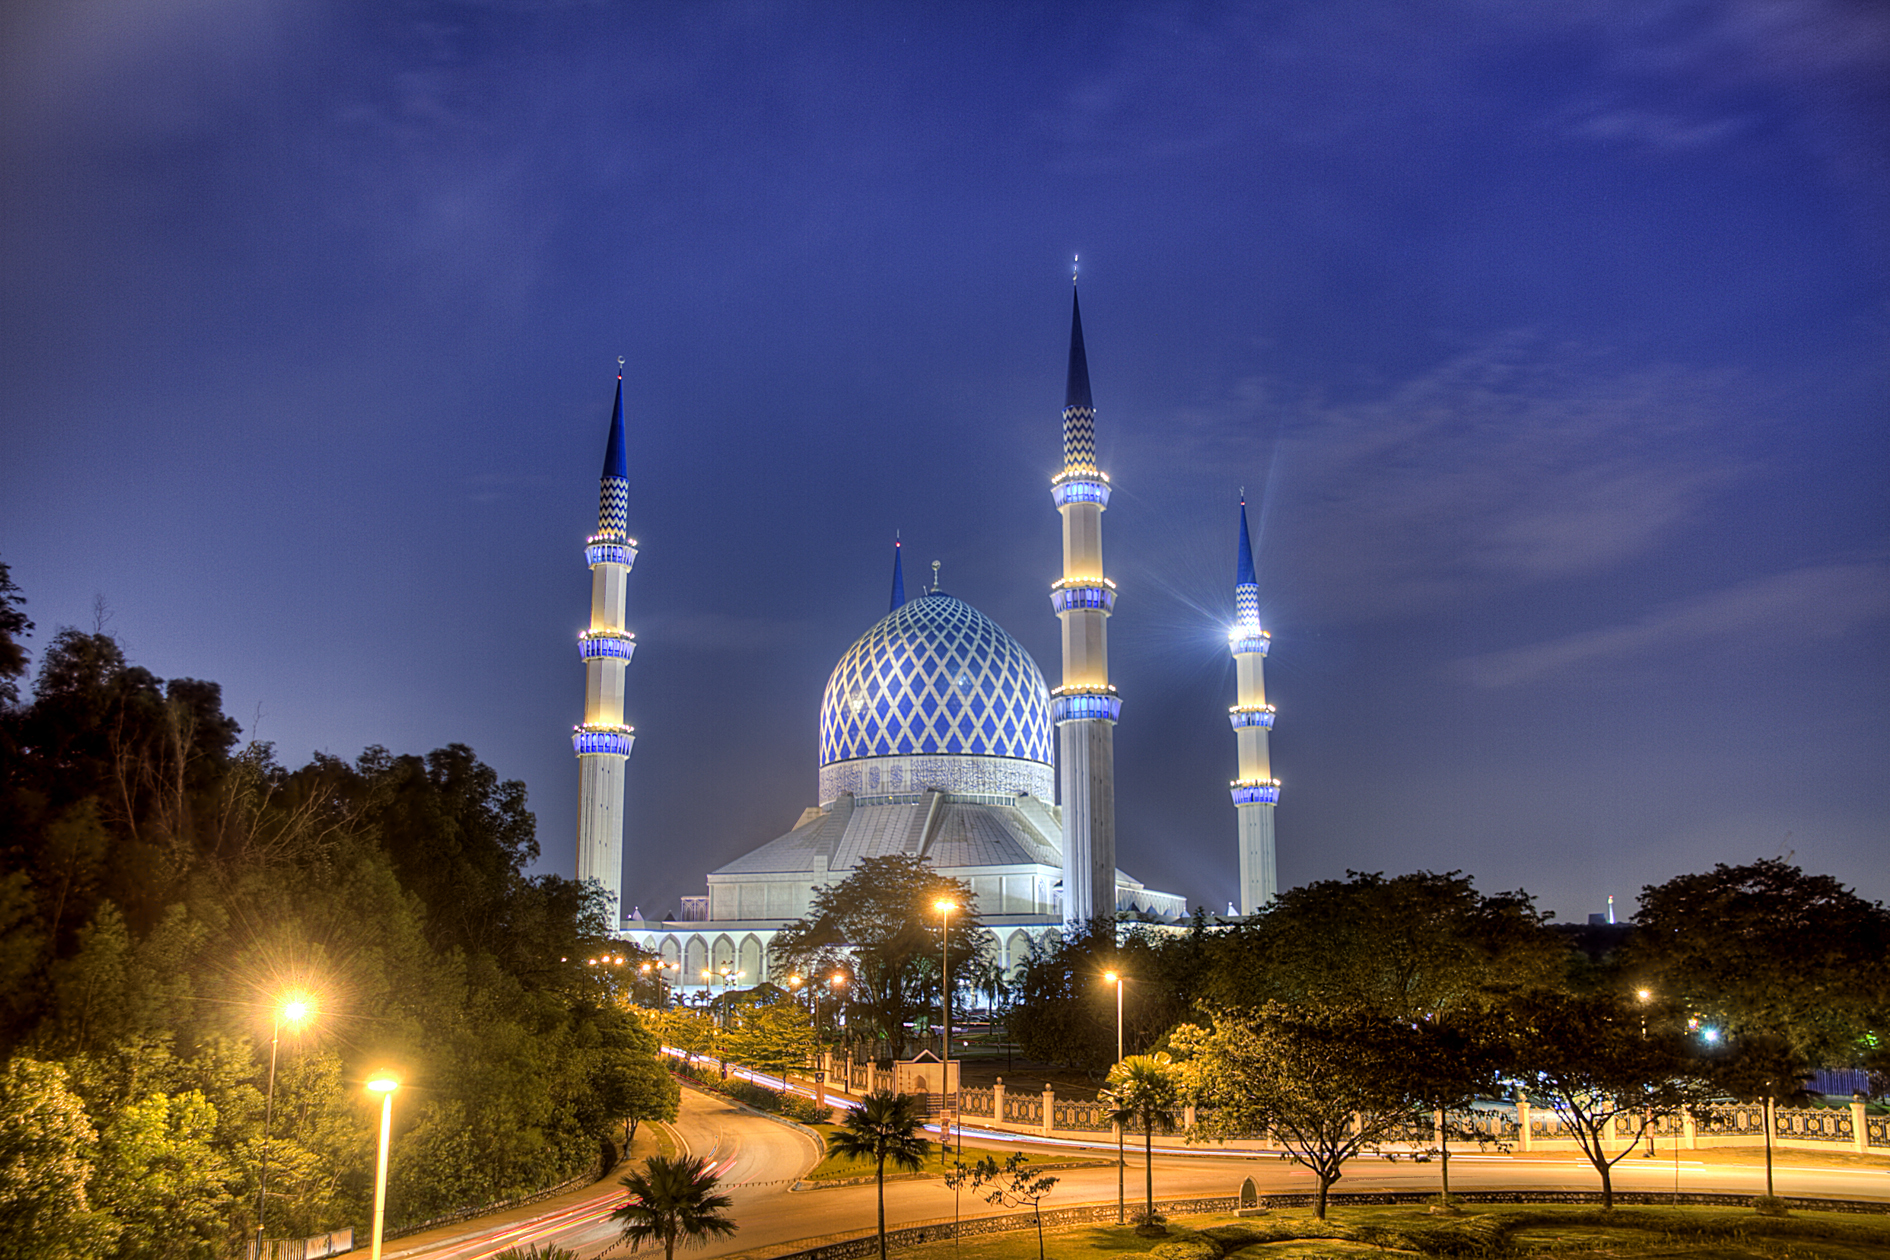 Shah_Alam_Blue_mosque_at_night (1)